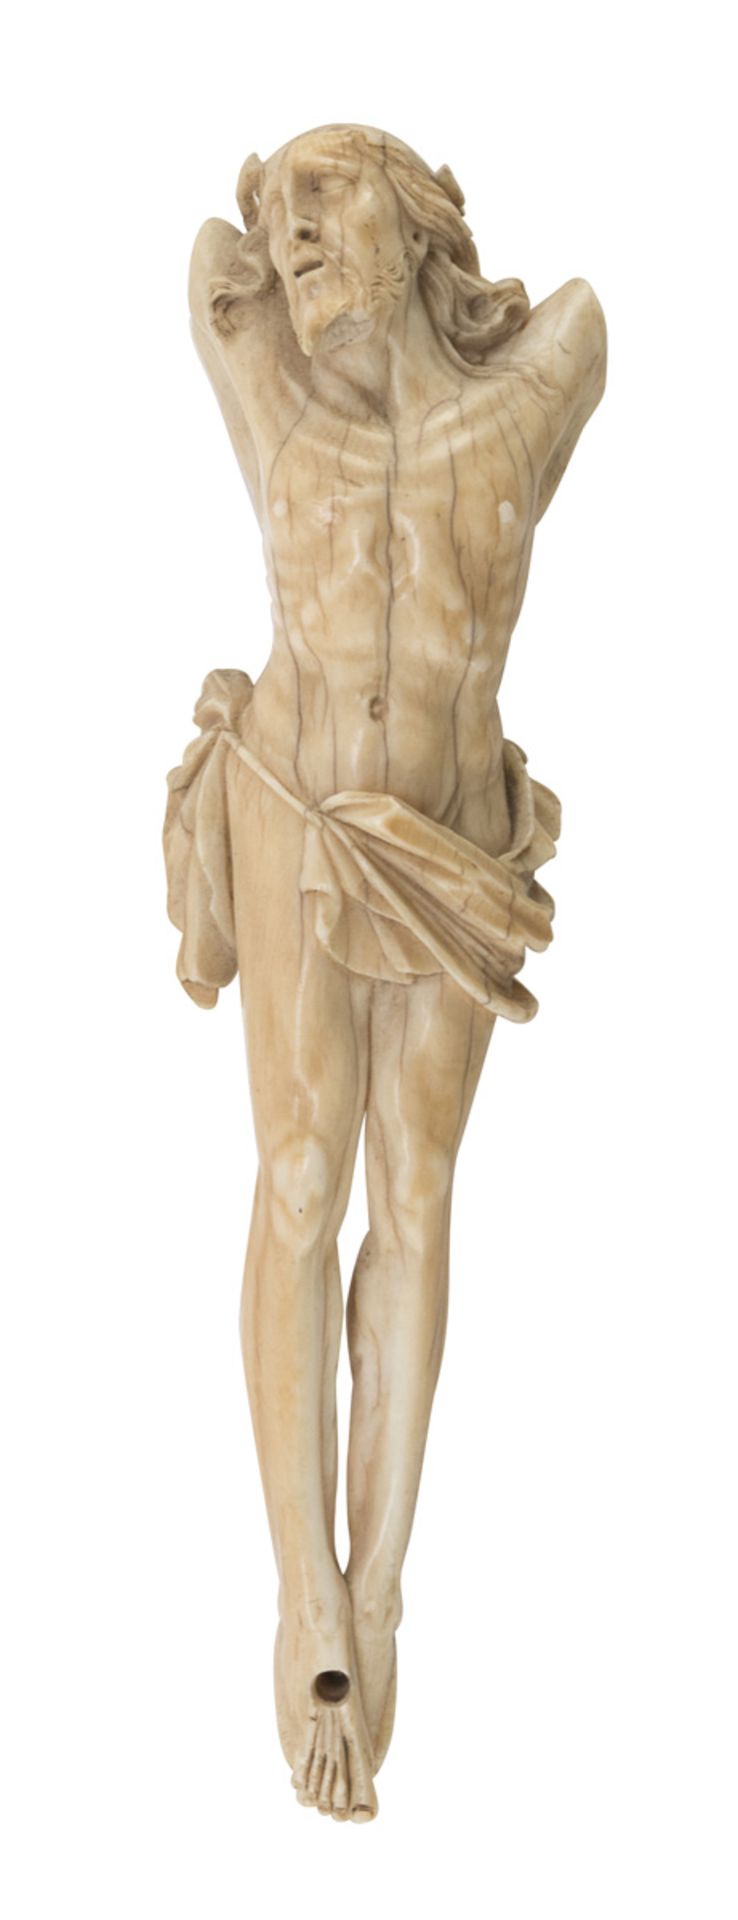 SMALL TORSO OF CHRIST IN IVORY - 18TH CENTURY